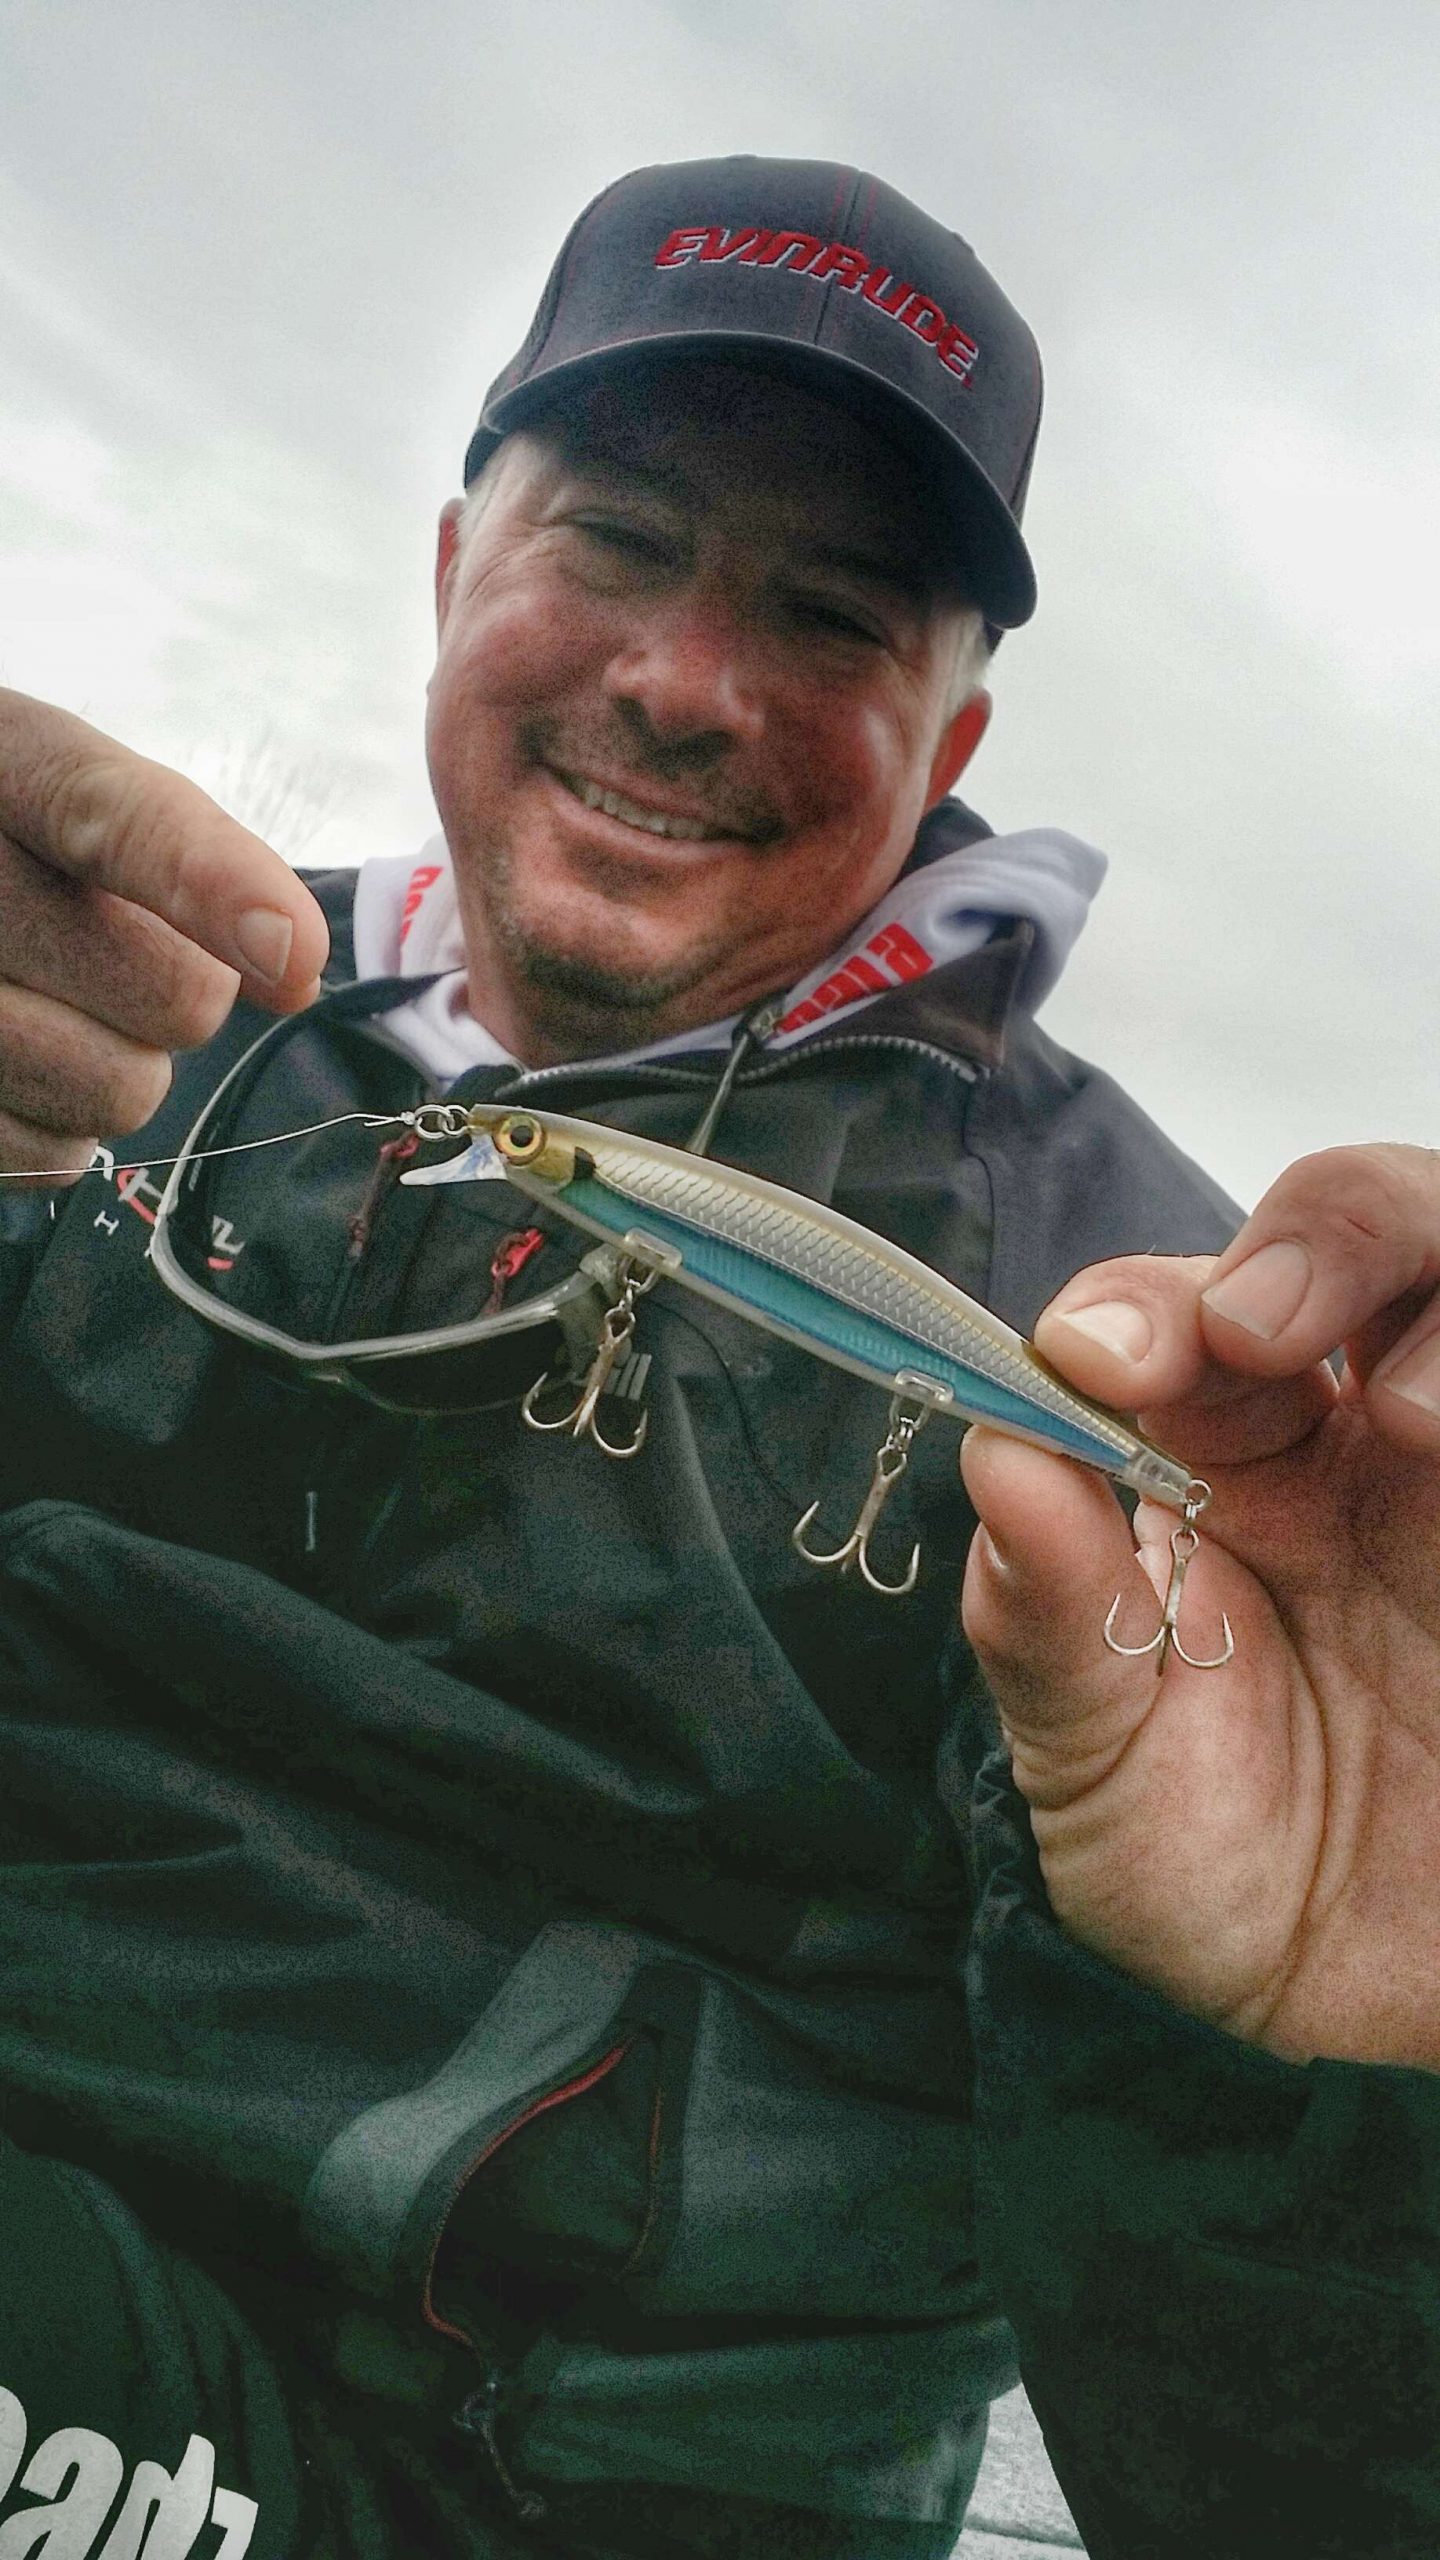 Randall Tharp stuck with main-lake docks in 10 to 25 feet and a Rapala Shadow Rap jerkbait (moss back shiner) the whole tournament. He fished slow, but made only three casts per dock: each side, and then down the front.